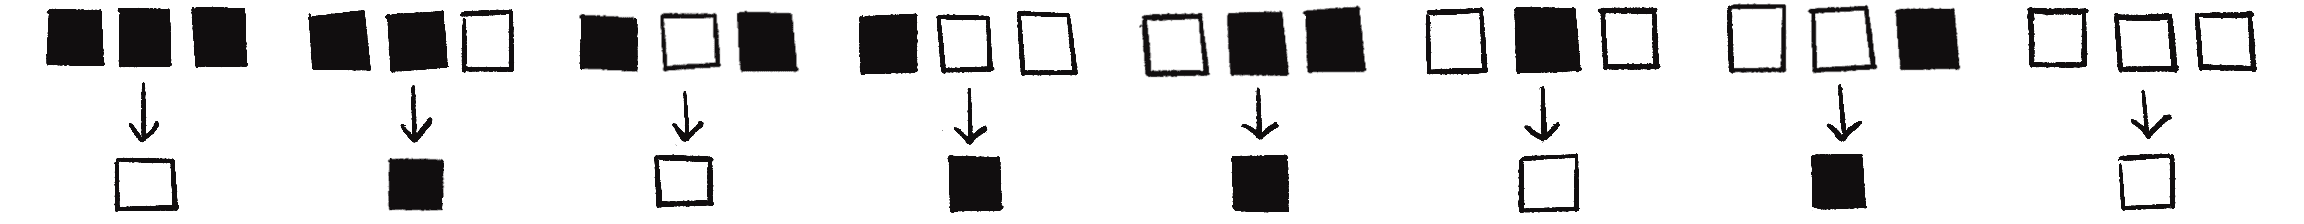 Figure 7.15: Representing the same ruleset (from Figure 7.8) with white and black squares